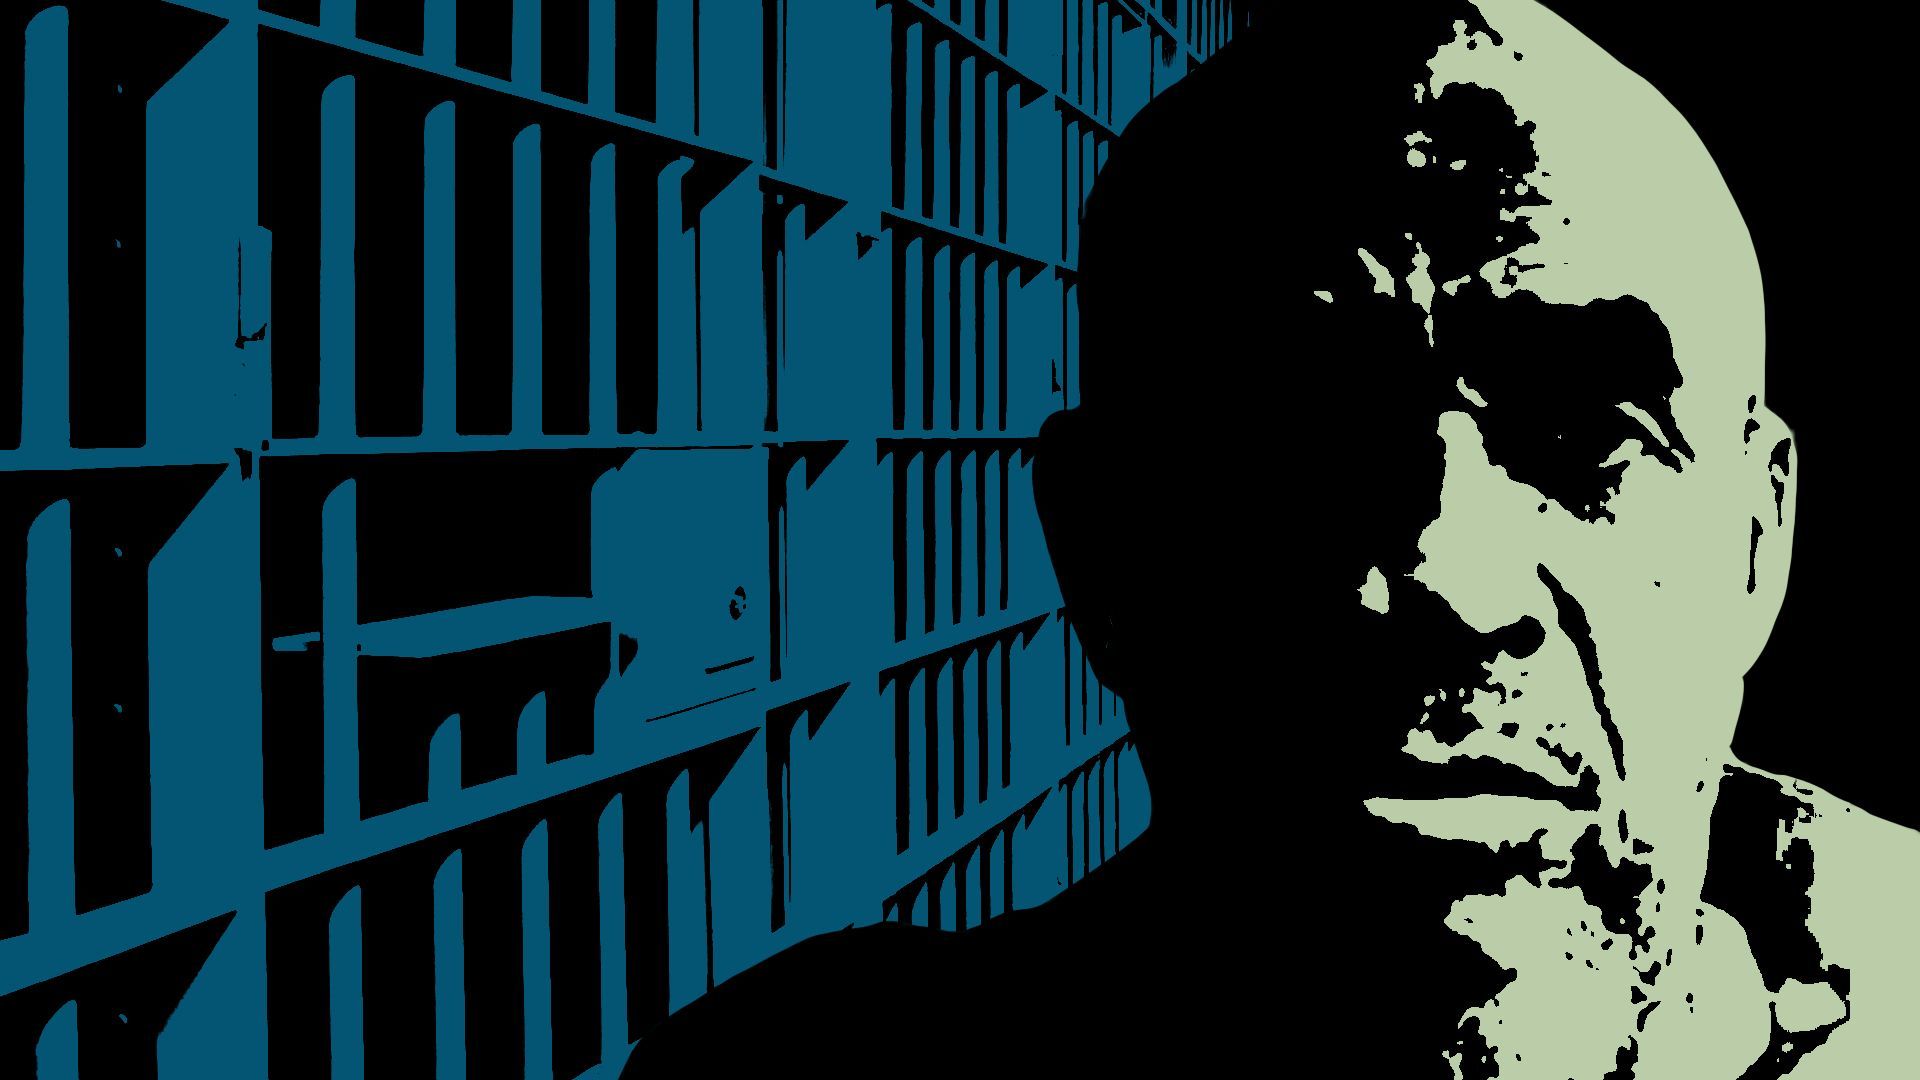 Photo illustration of Michael White in front of prison bars.